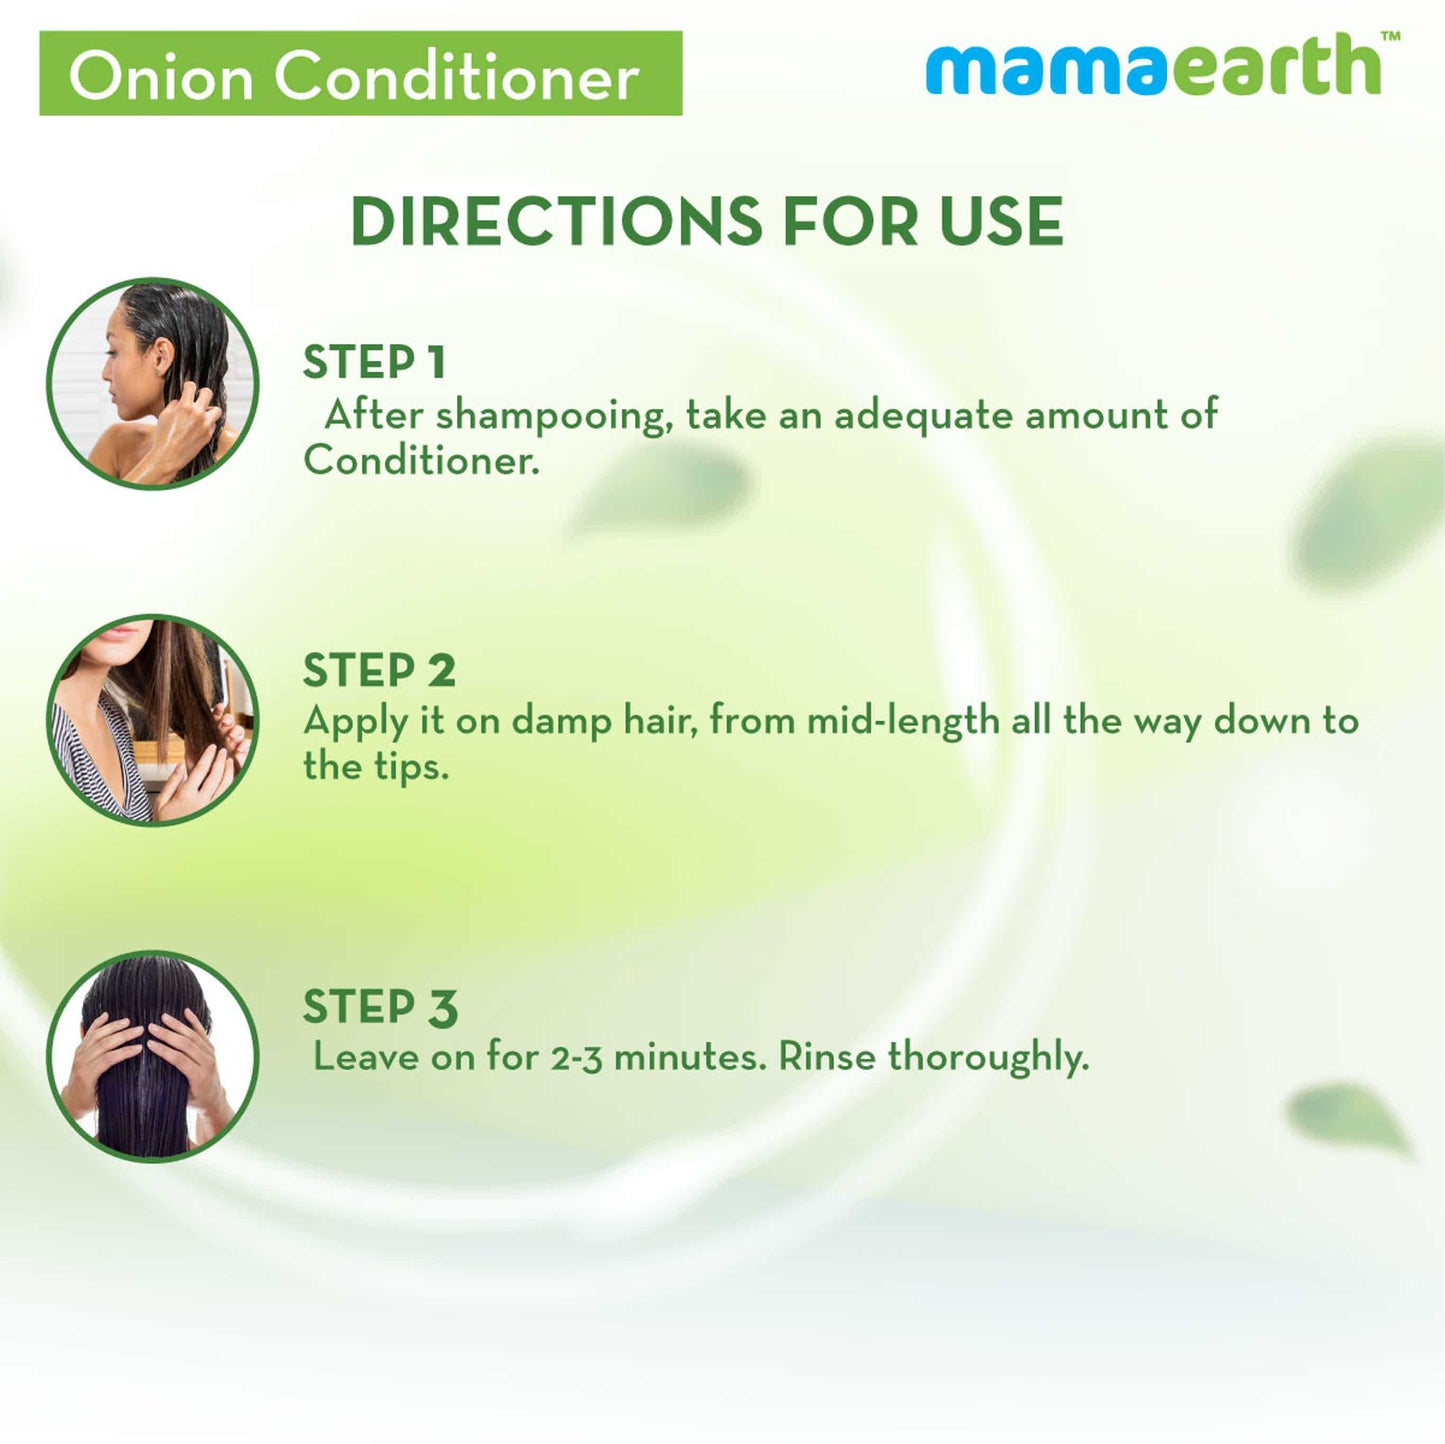 Mamaearth Hairfall Control & Hair Regrowth Onion Conditioner with Onion and Coconut - 250ml